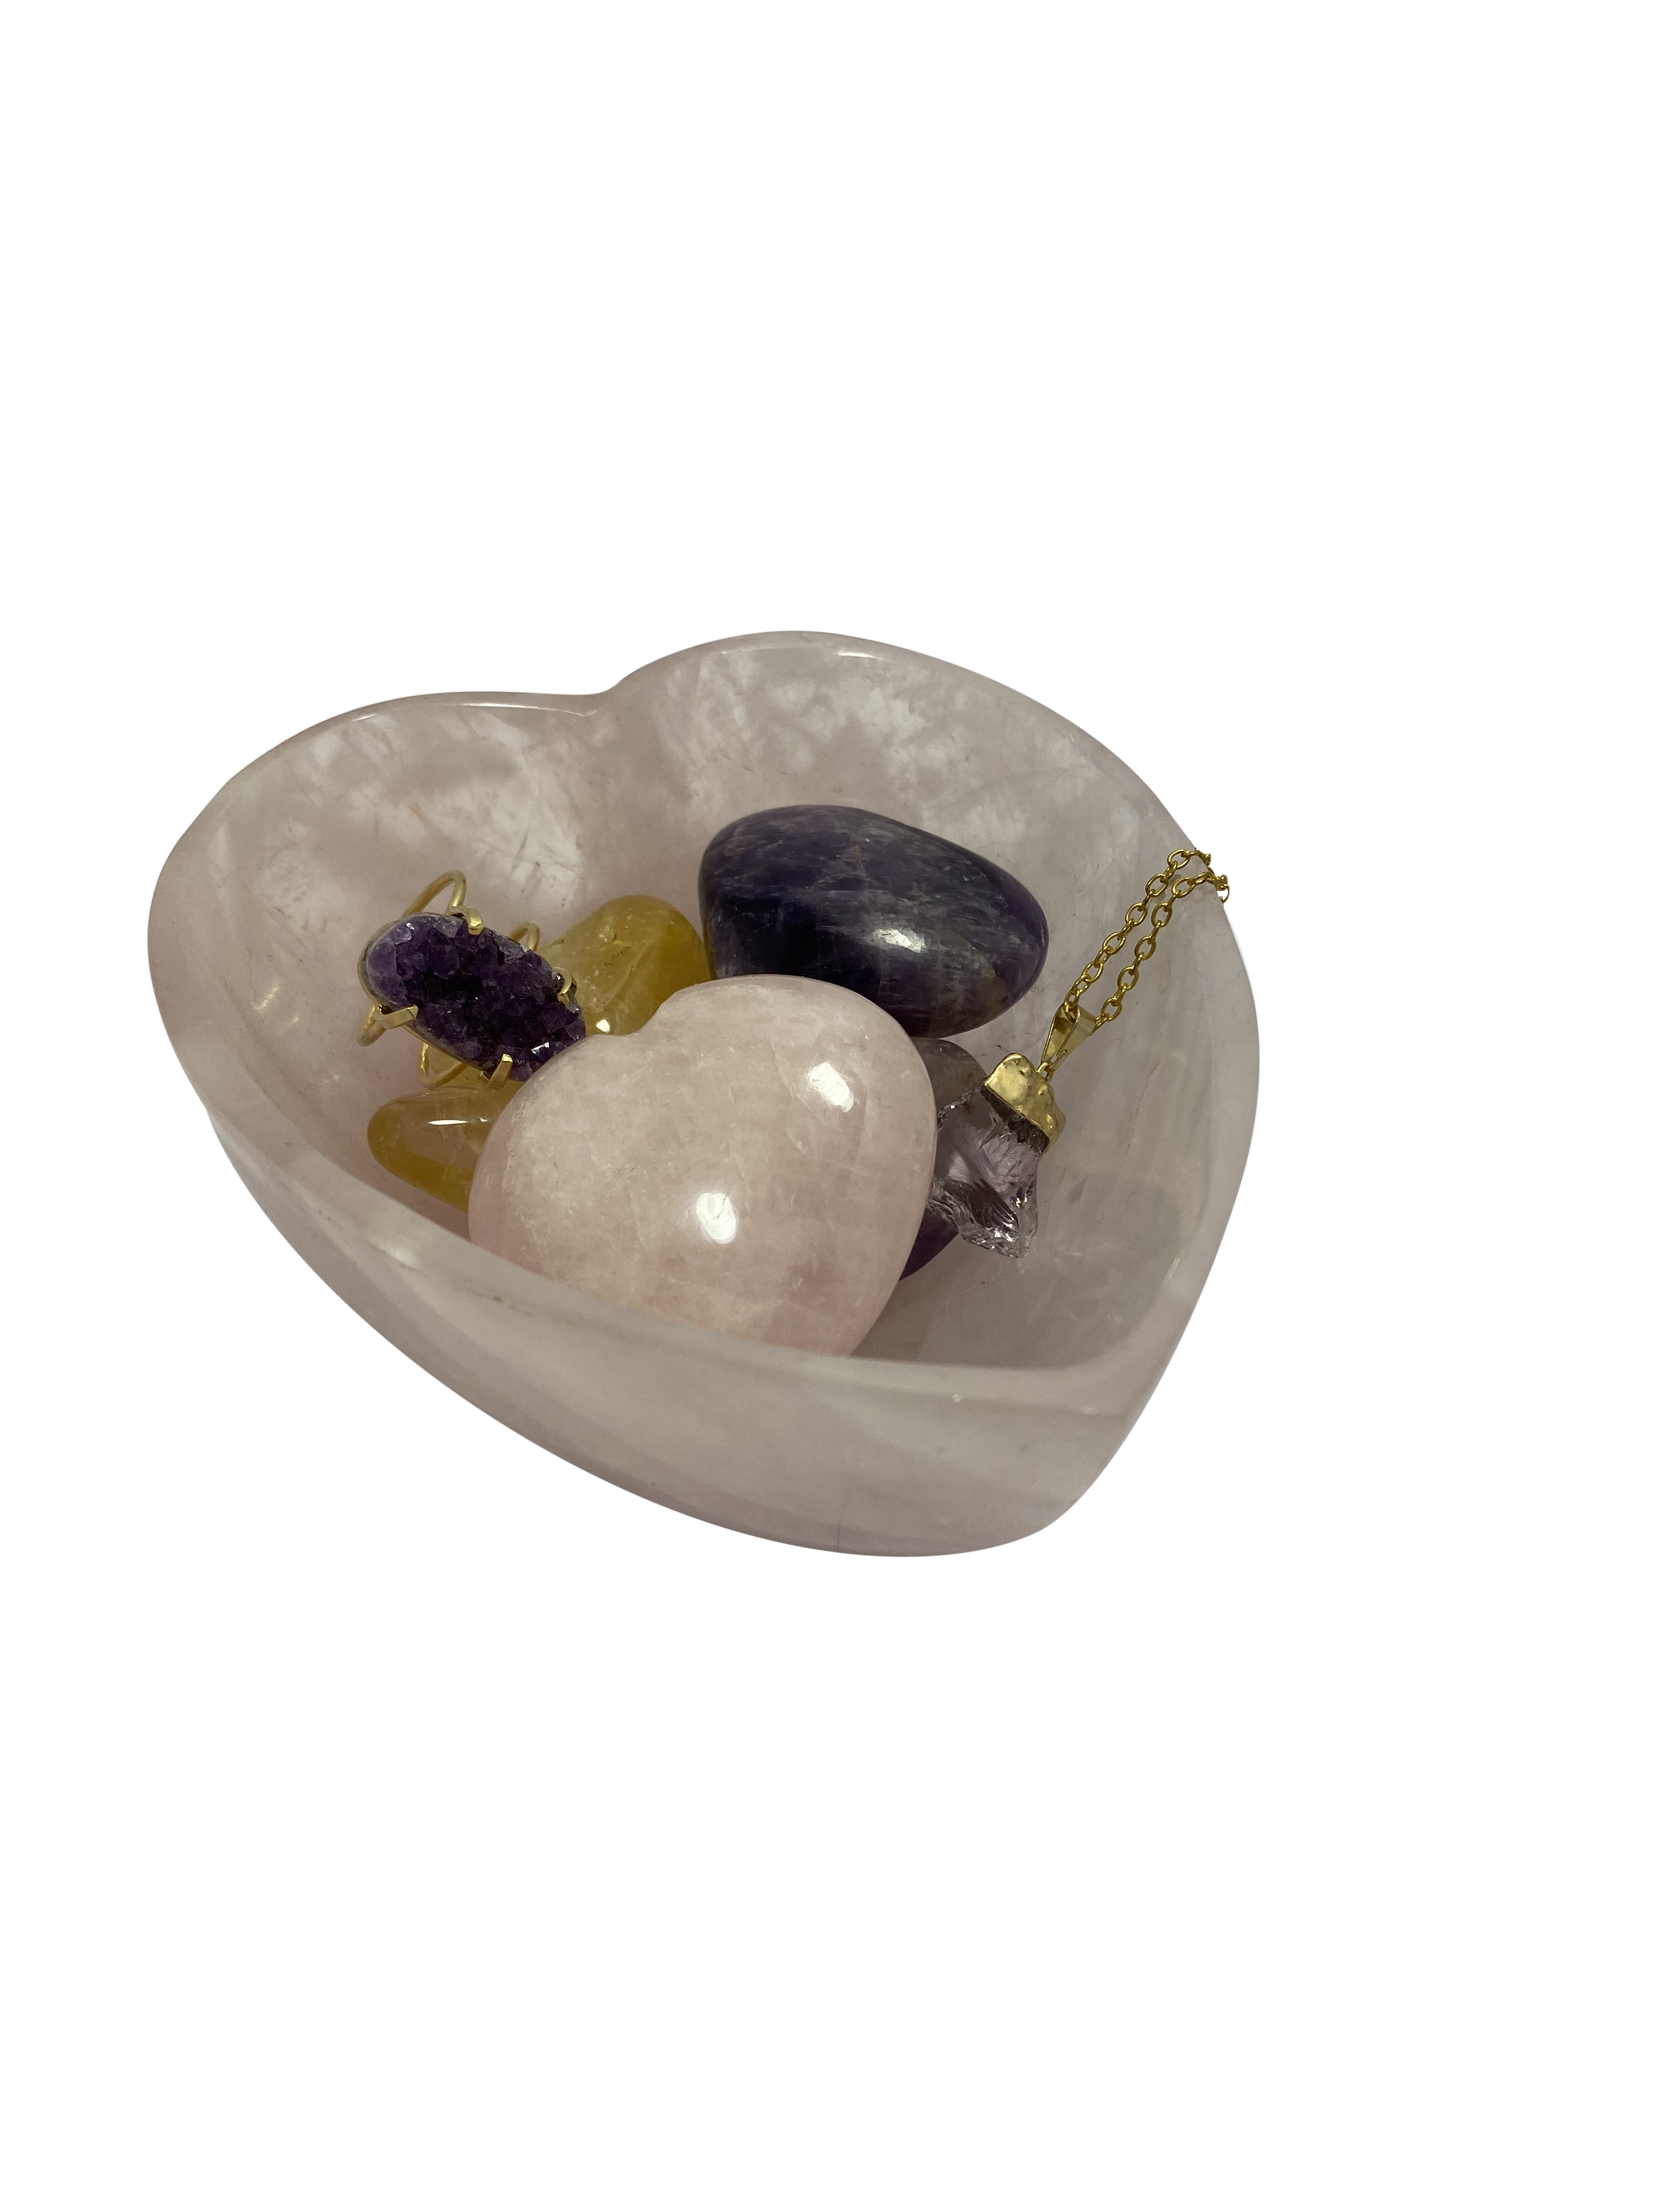 Rose Quartz Heart Shaped Bowl Crystals and Jewelry Holder